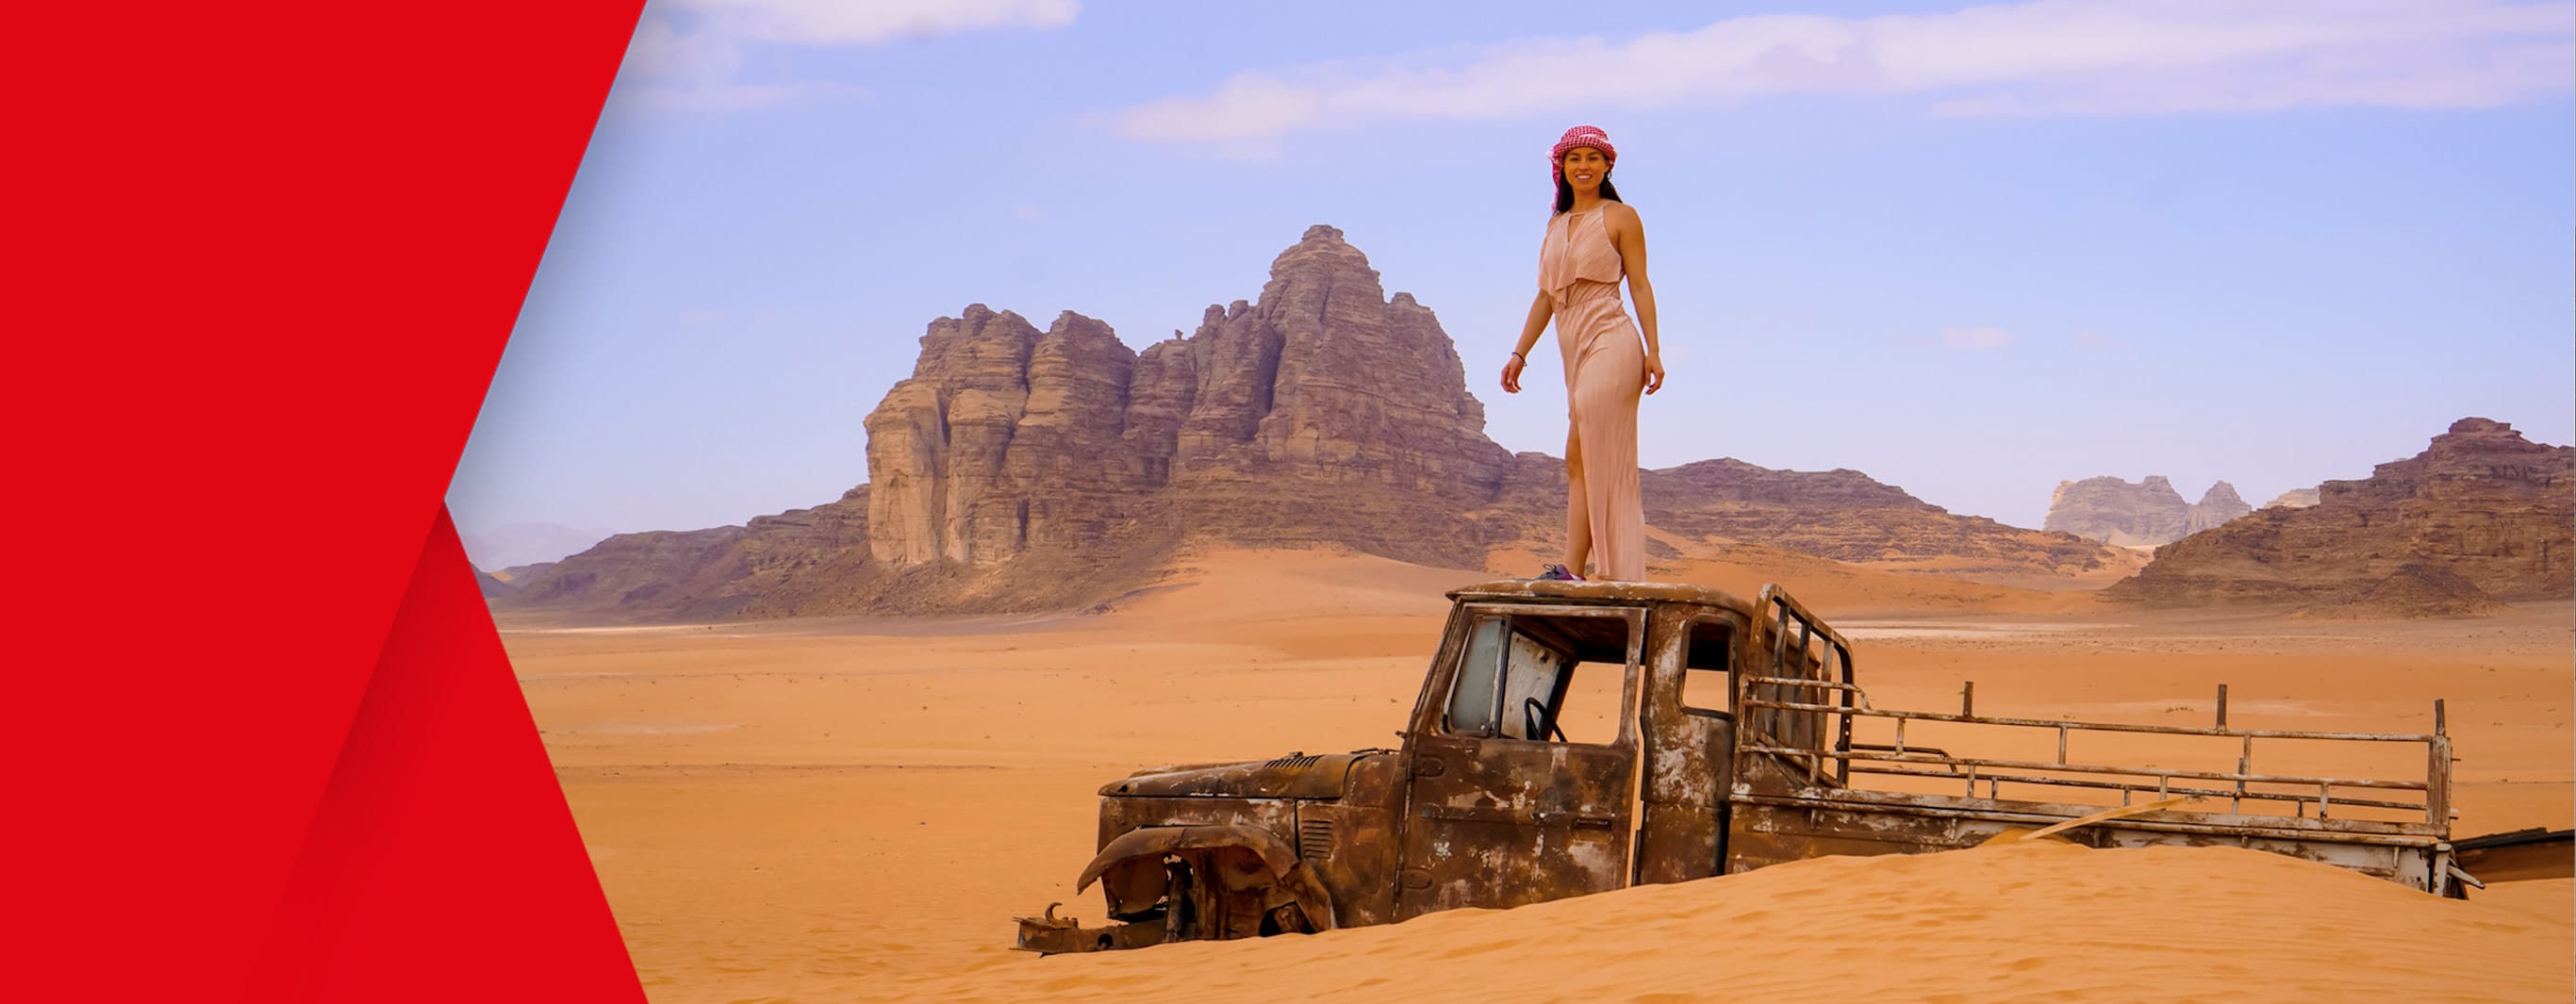 A woman in a billowing full length dress and wearing a floral crown smiles for the camera as she stands atop an old, rusty, abondoned pickup truck that has been semi-consumed by the desert sands. In the distance we see rocky outshoots rising from the sand to form a dramatic cliff backdrop